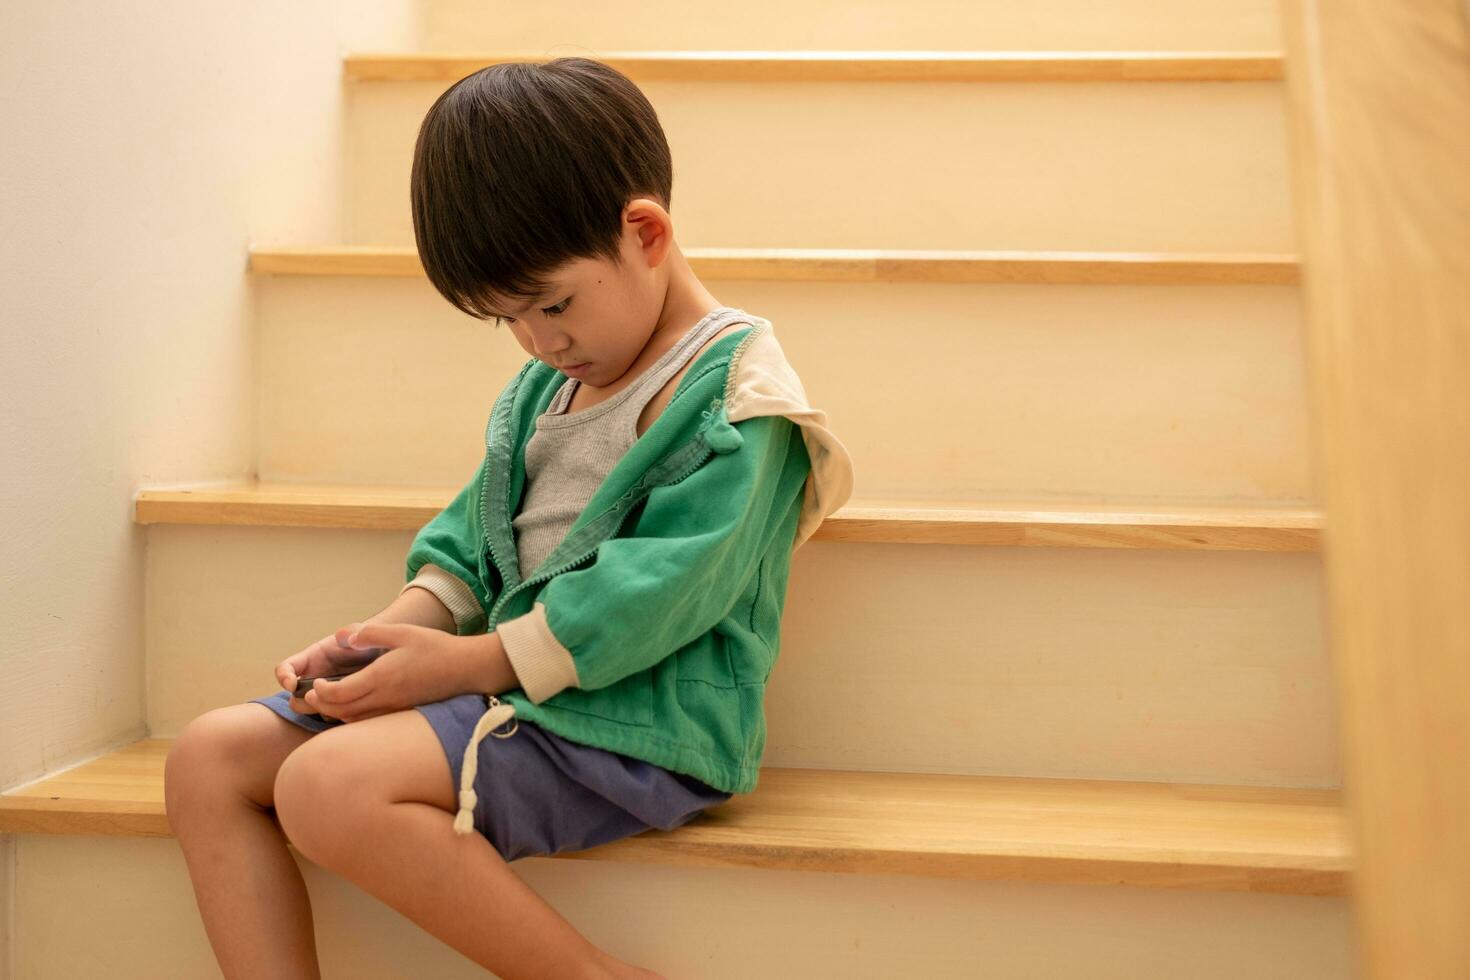 A boy who was scolded by his mother secretly came to play on the phone on the stairs. photo